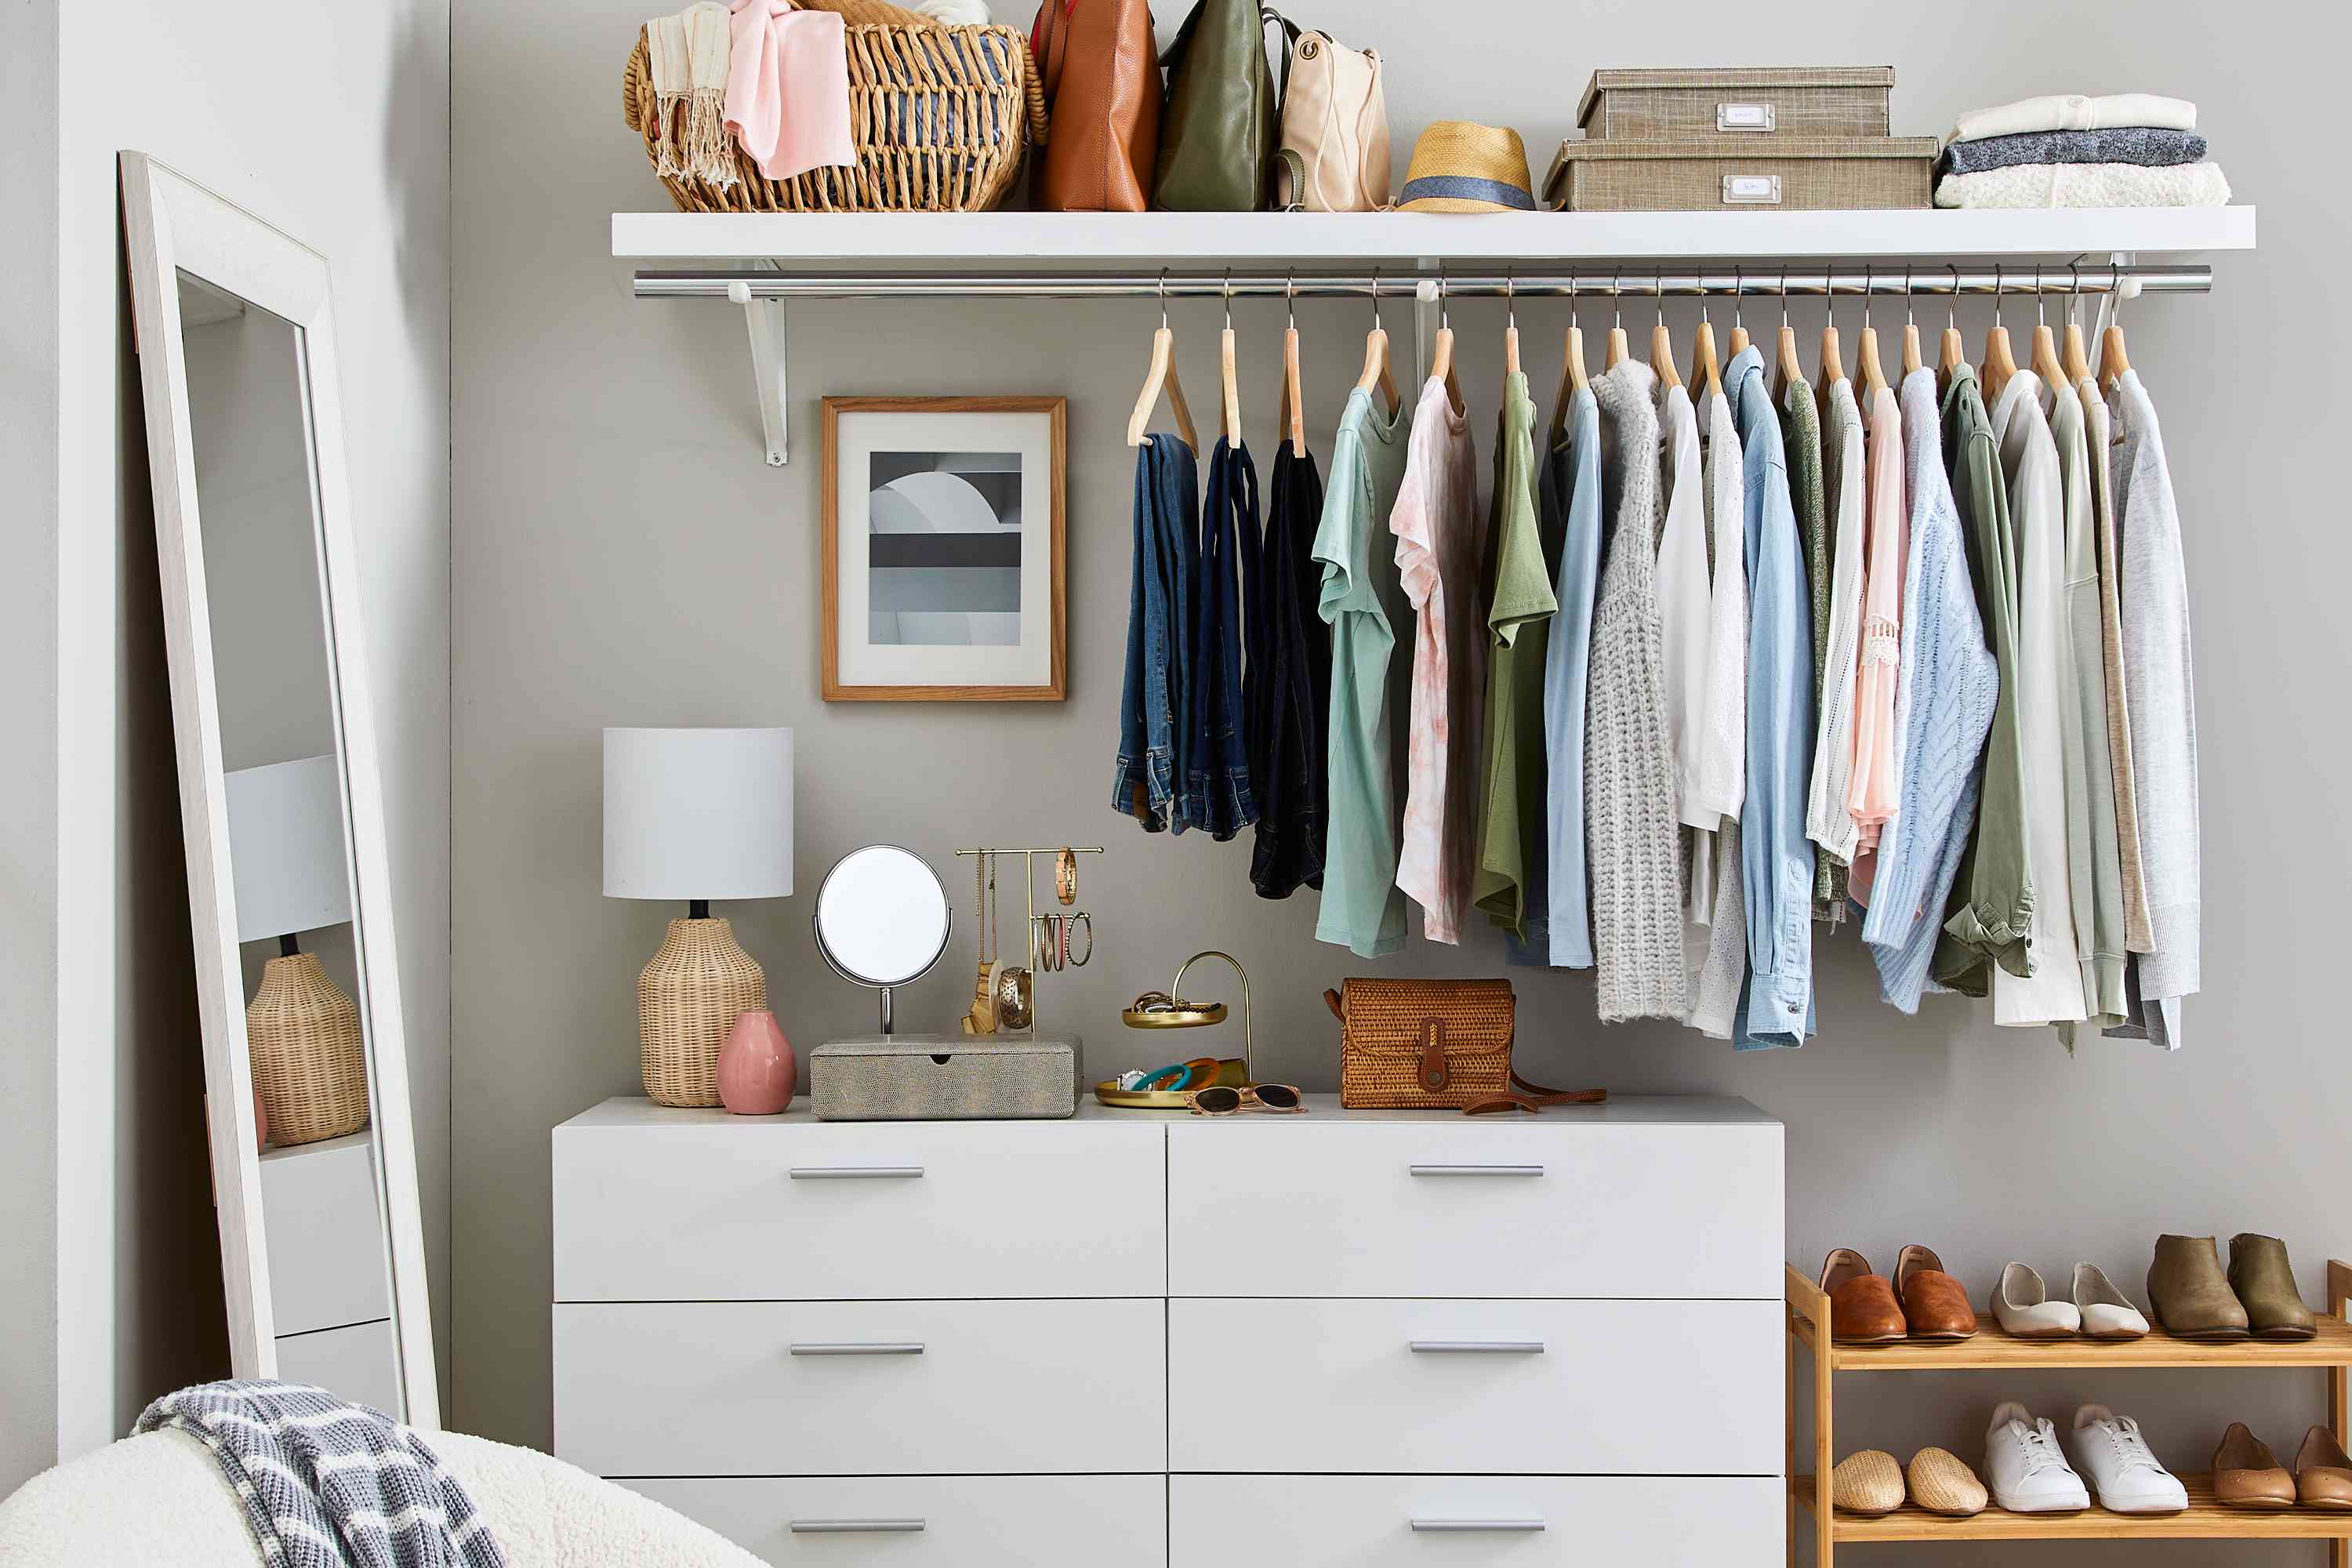 How To Build A Built-In Dresser